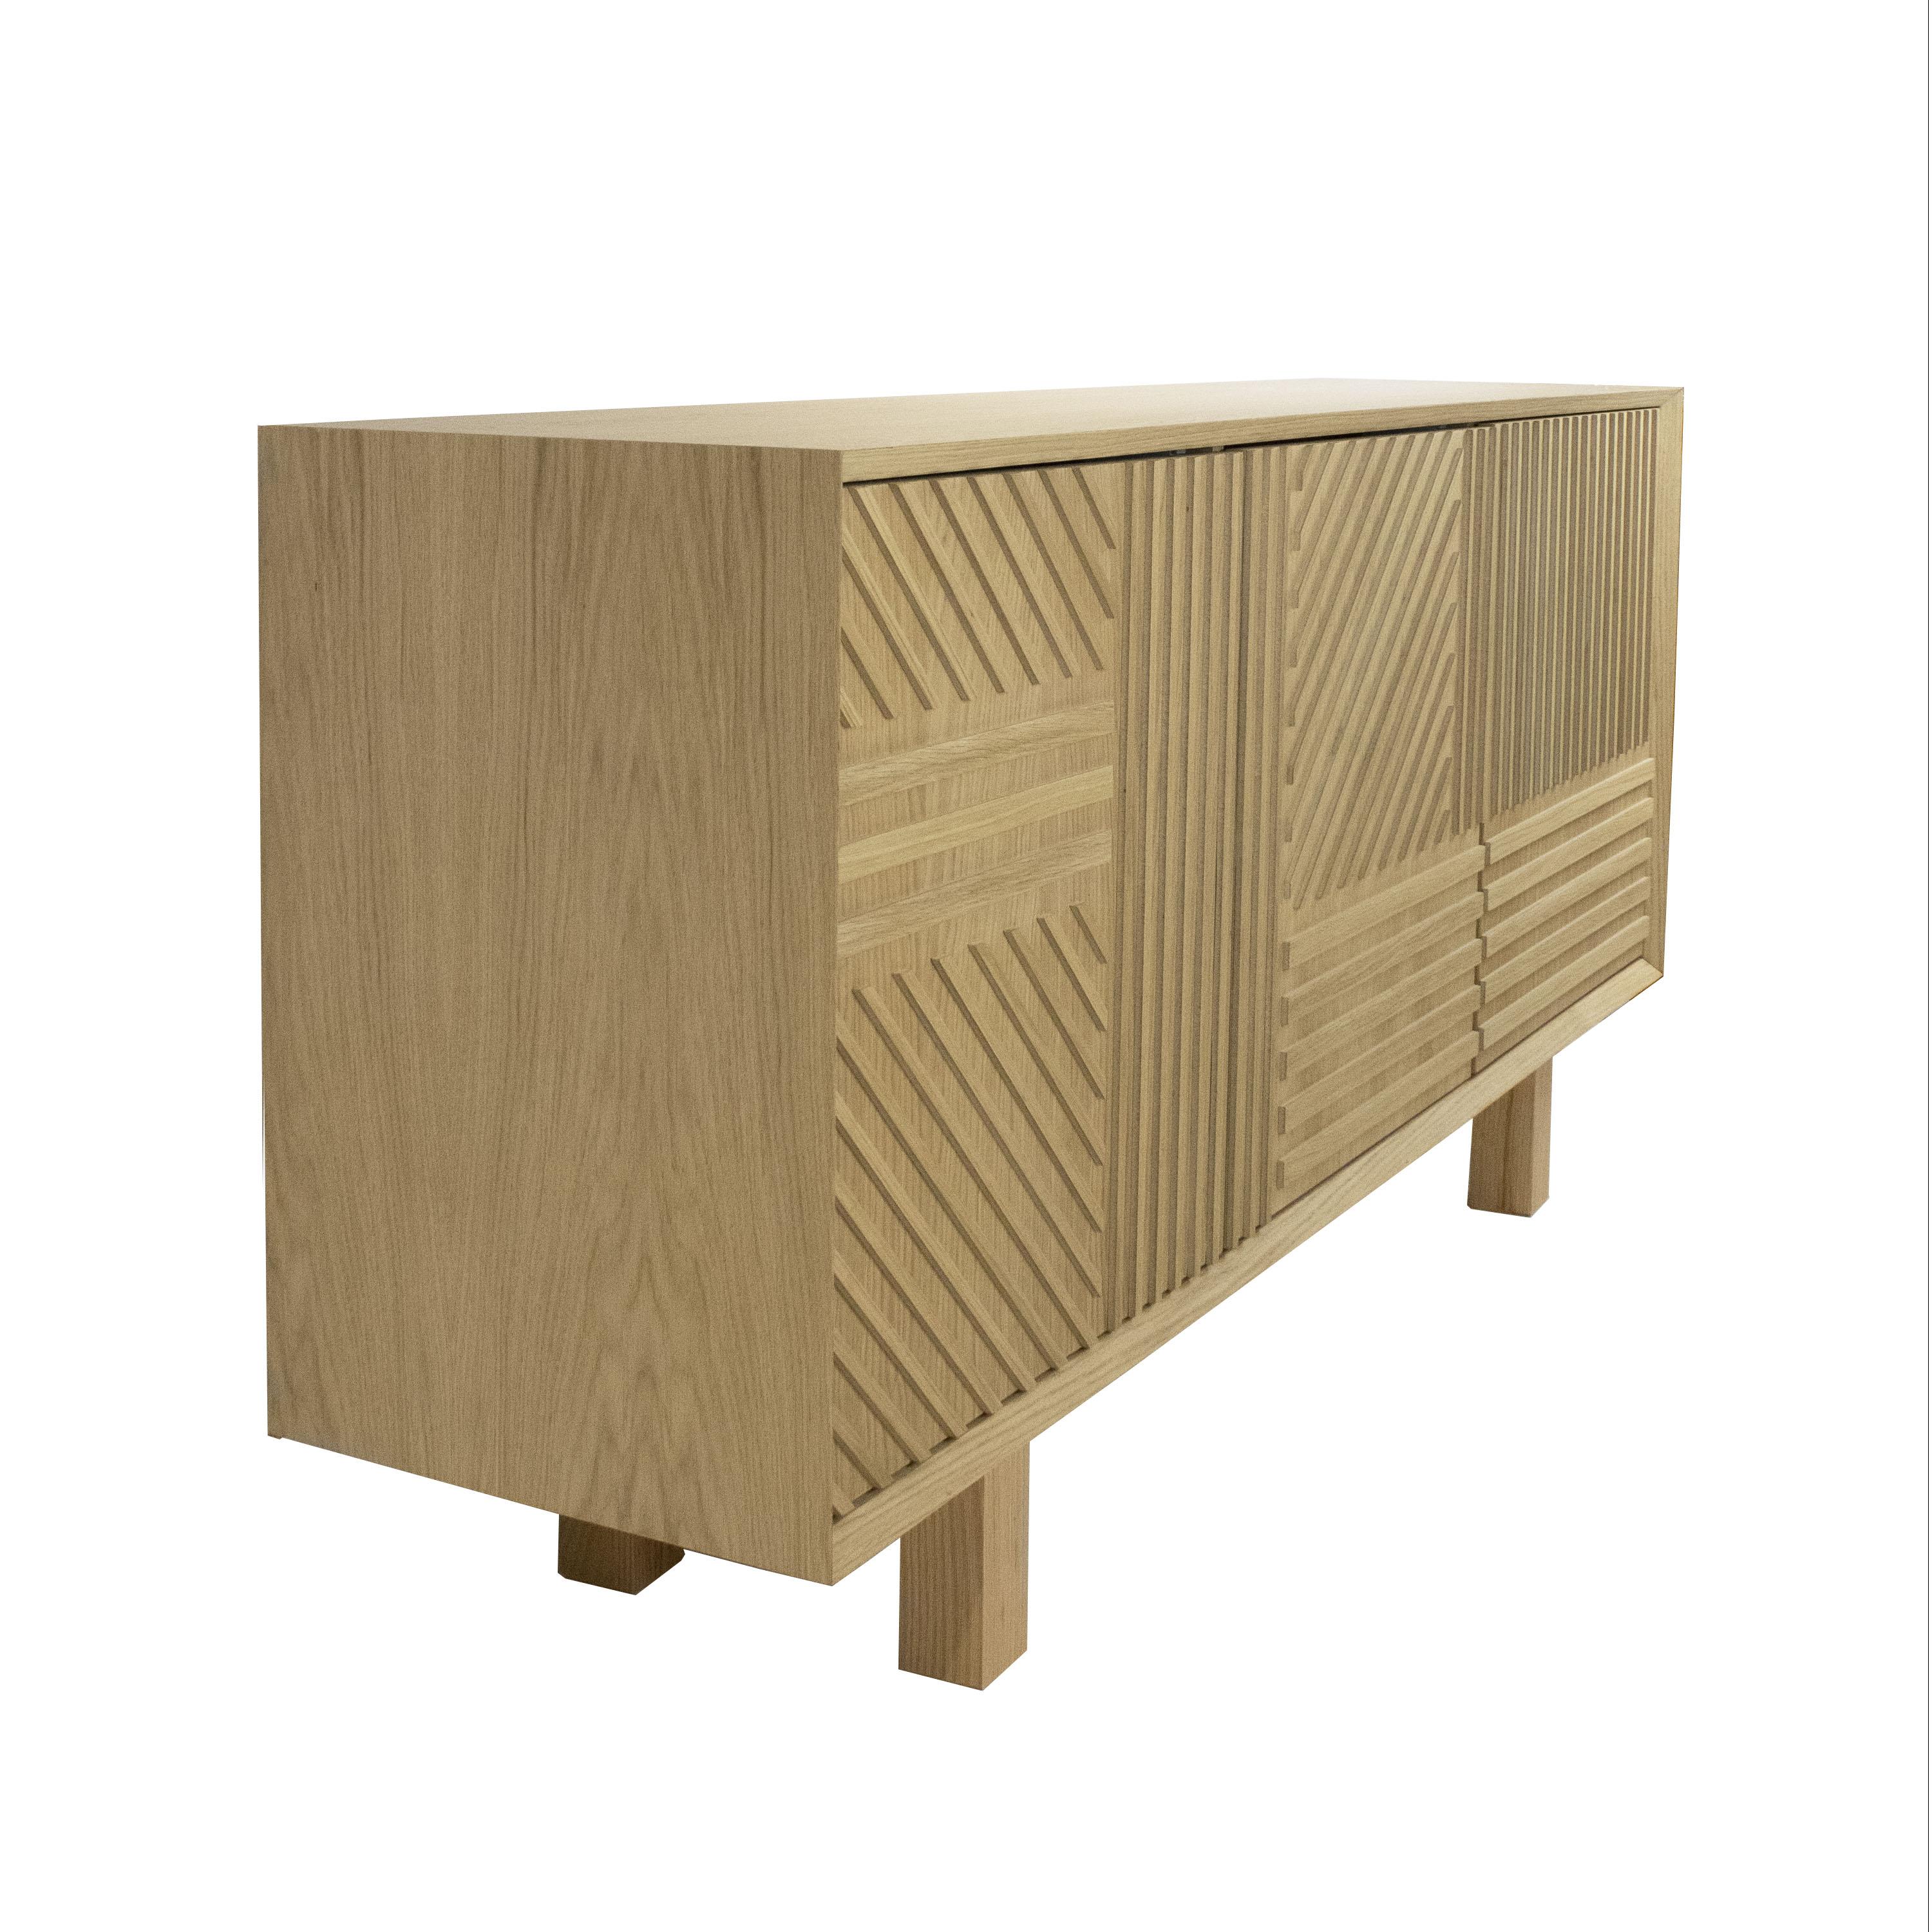 Handcrafted sideboard designed by IKB 191 studio. It consists of a solid oak structure with three doors decorated with a linear wood grid and a click-tight closure. Storage space is provided in the inner part, which is divided into three